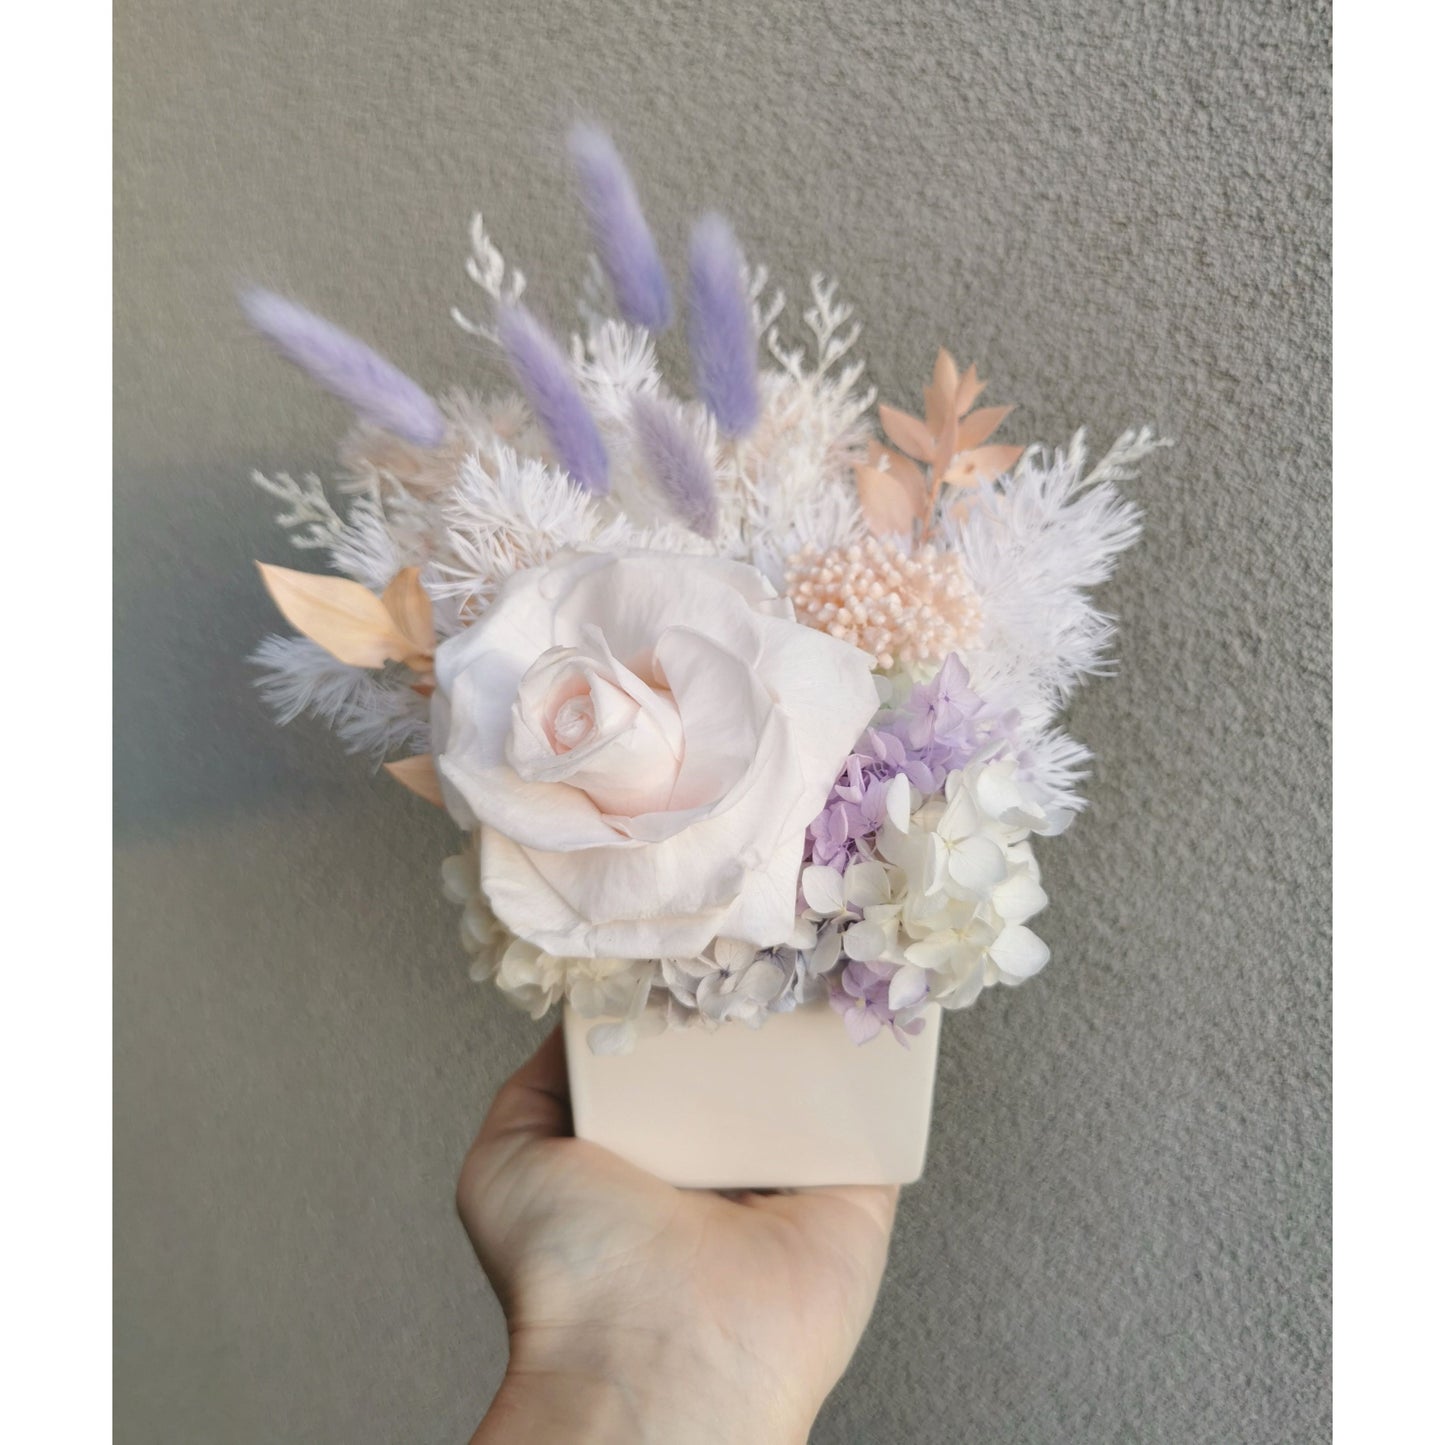 Pastel coloured dried & preserved flower arrangements in white cube pot. Features a soft pink preserved rose. Picture shows arrangement being held by hand against a blank wall.